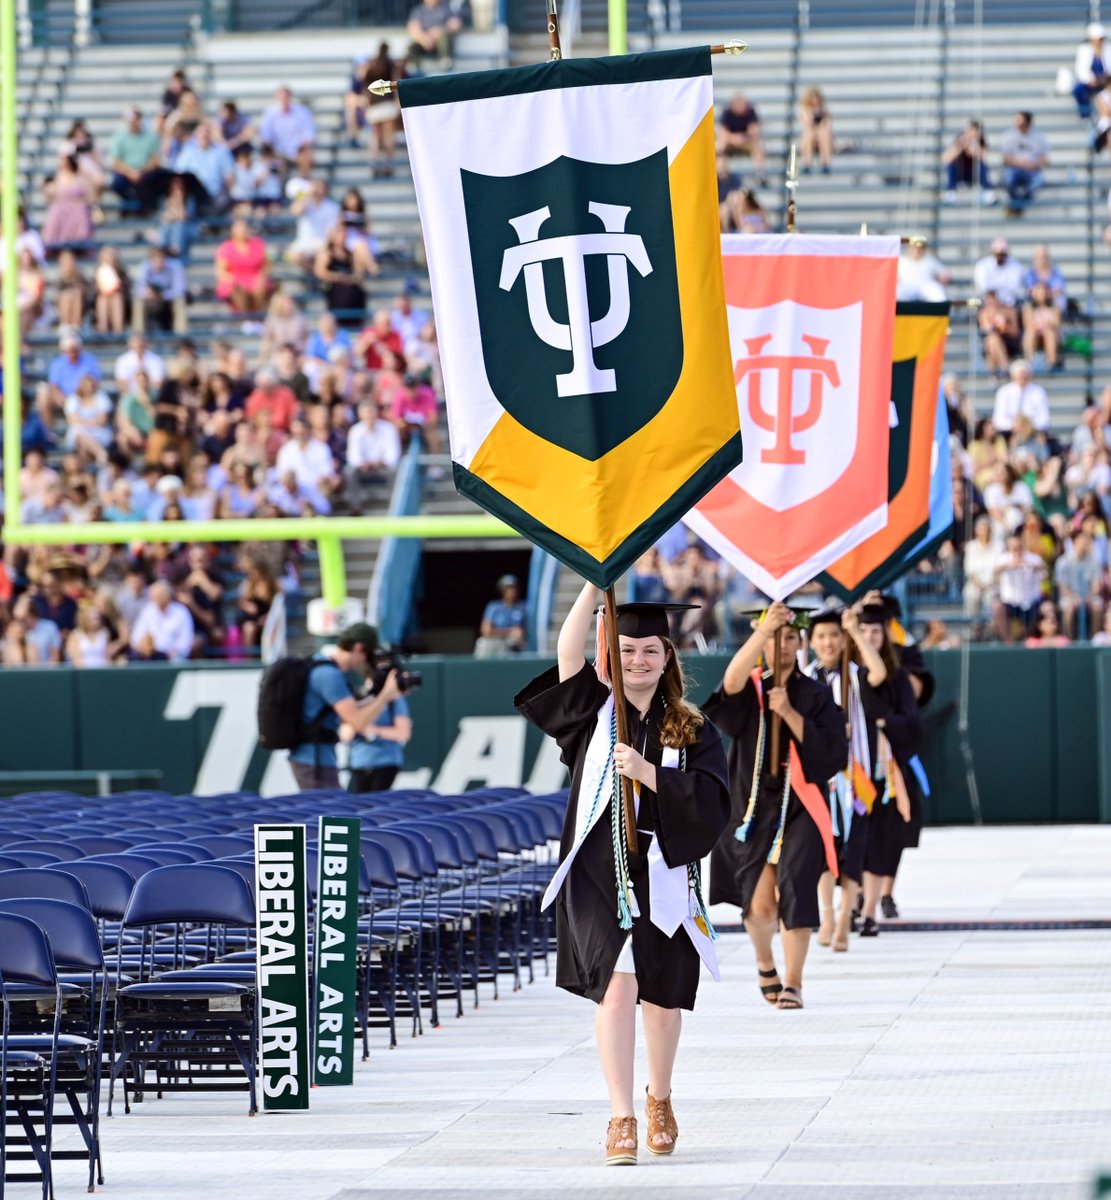 🎓 Schedule Update 🎓 Due to severe weather expected for Friday evening into Saturday morning, tomorrow’s @TulaneSLA Diploma Ceremony has been moved to 2:00 p.m. in Yulman Stadium instead of 6:30 p.m. Visit the commencement website for more info: commencement.tulane.edu.